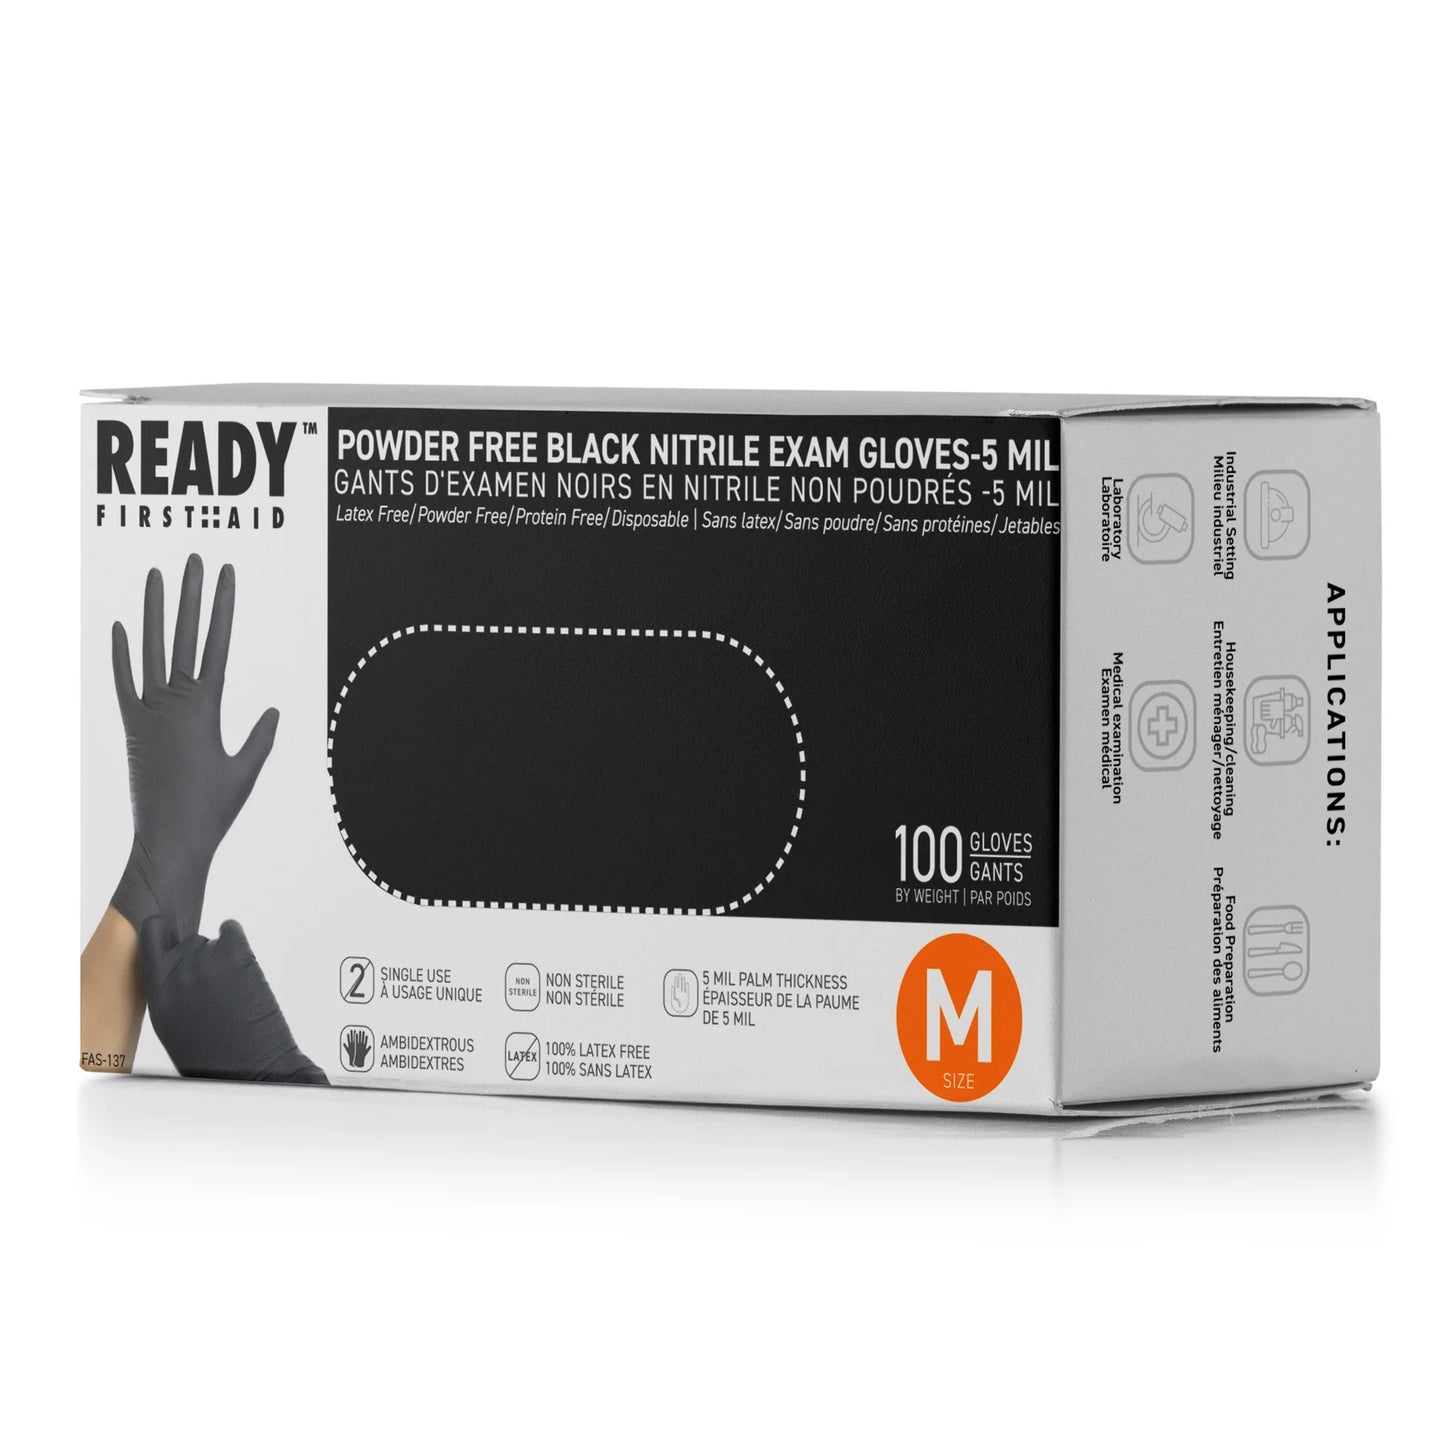 Black Nitrile Gloves (M), Box Of 100 Pieces, 5.0 Mil - Ready First Aid™